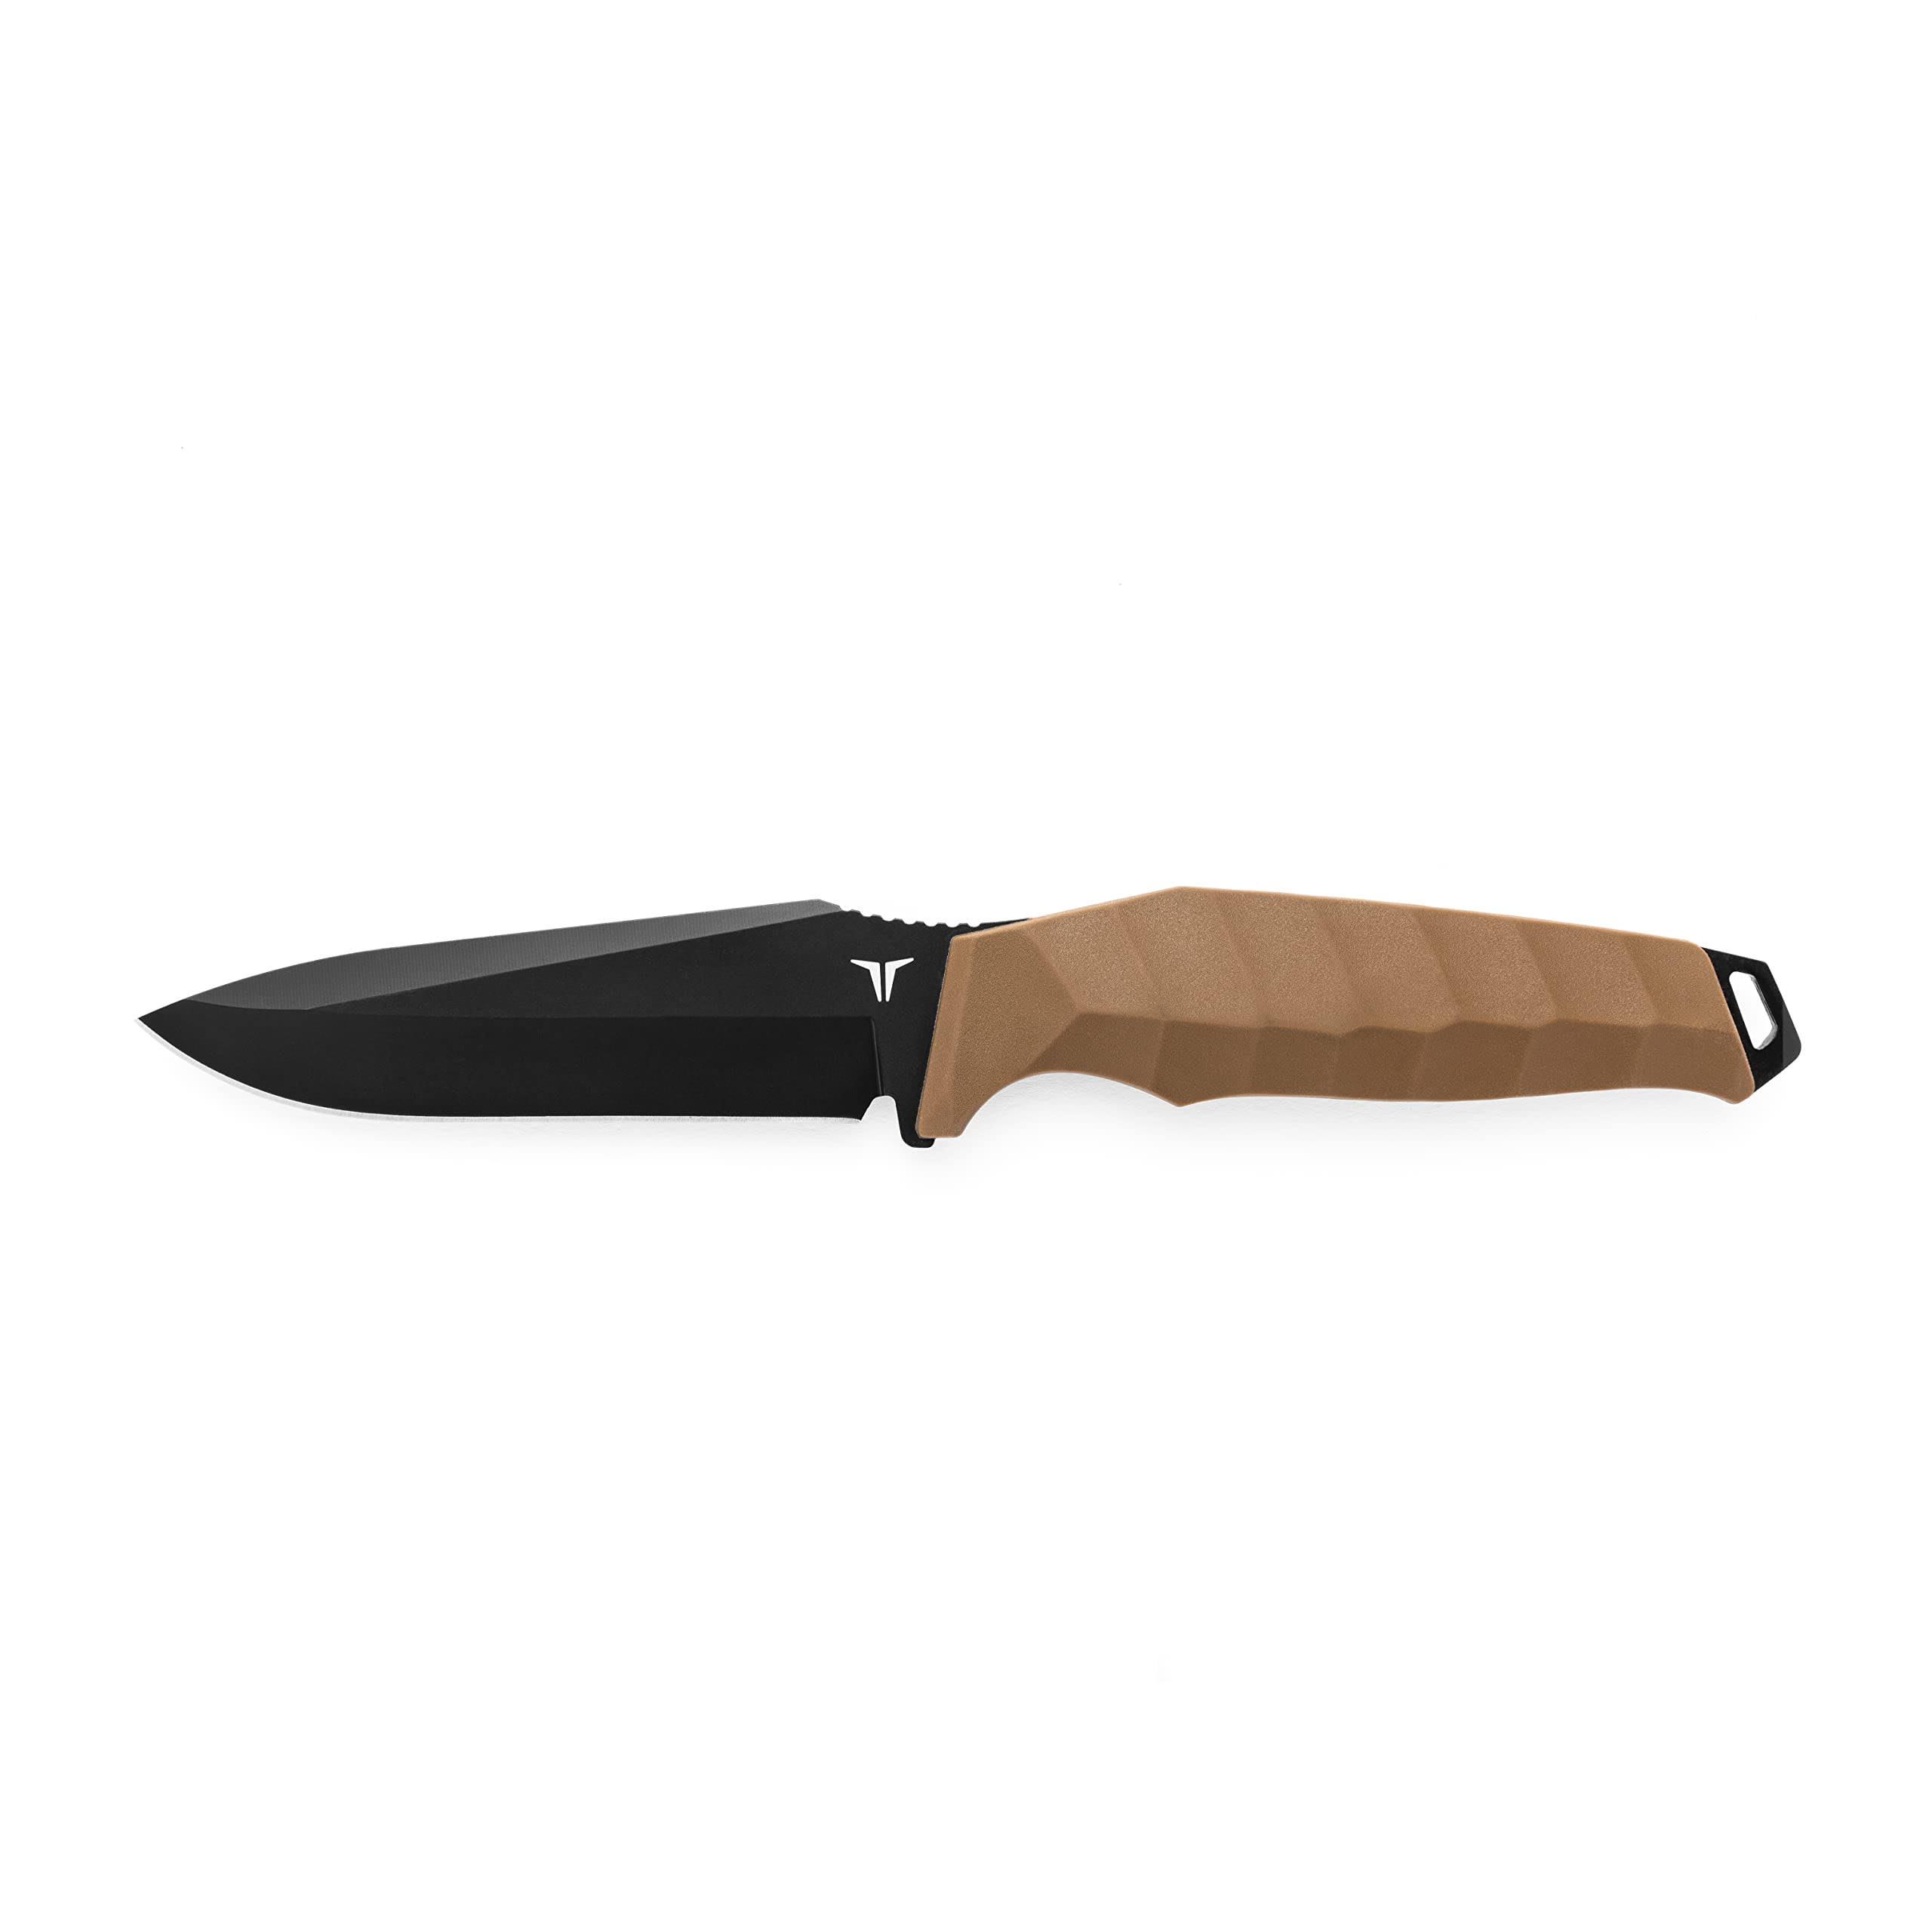 True Utility Fixed Blade Knife | Outdoor Sporting Goods Store